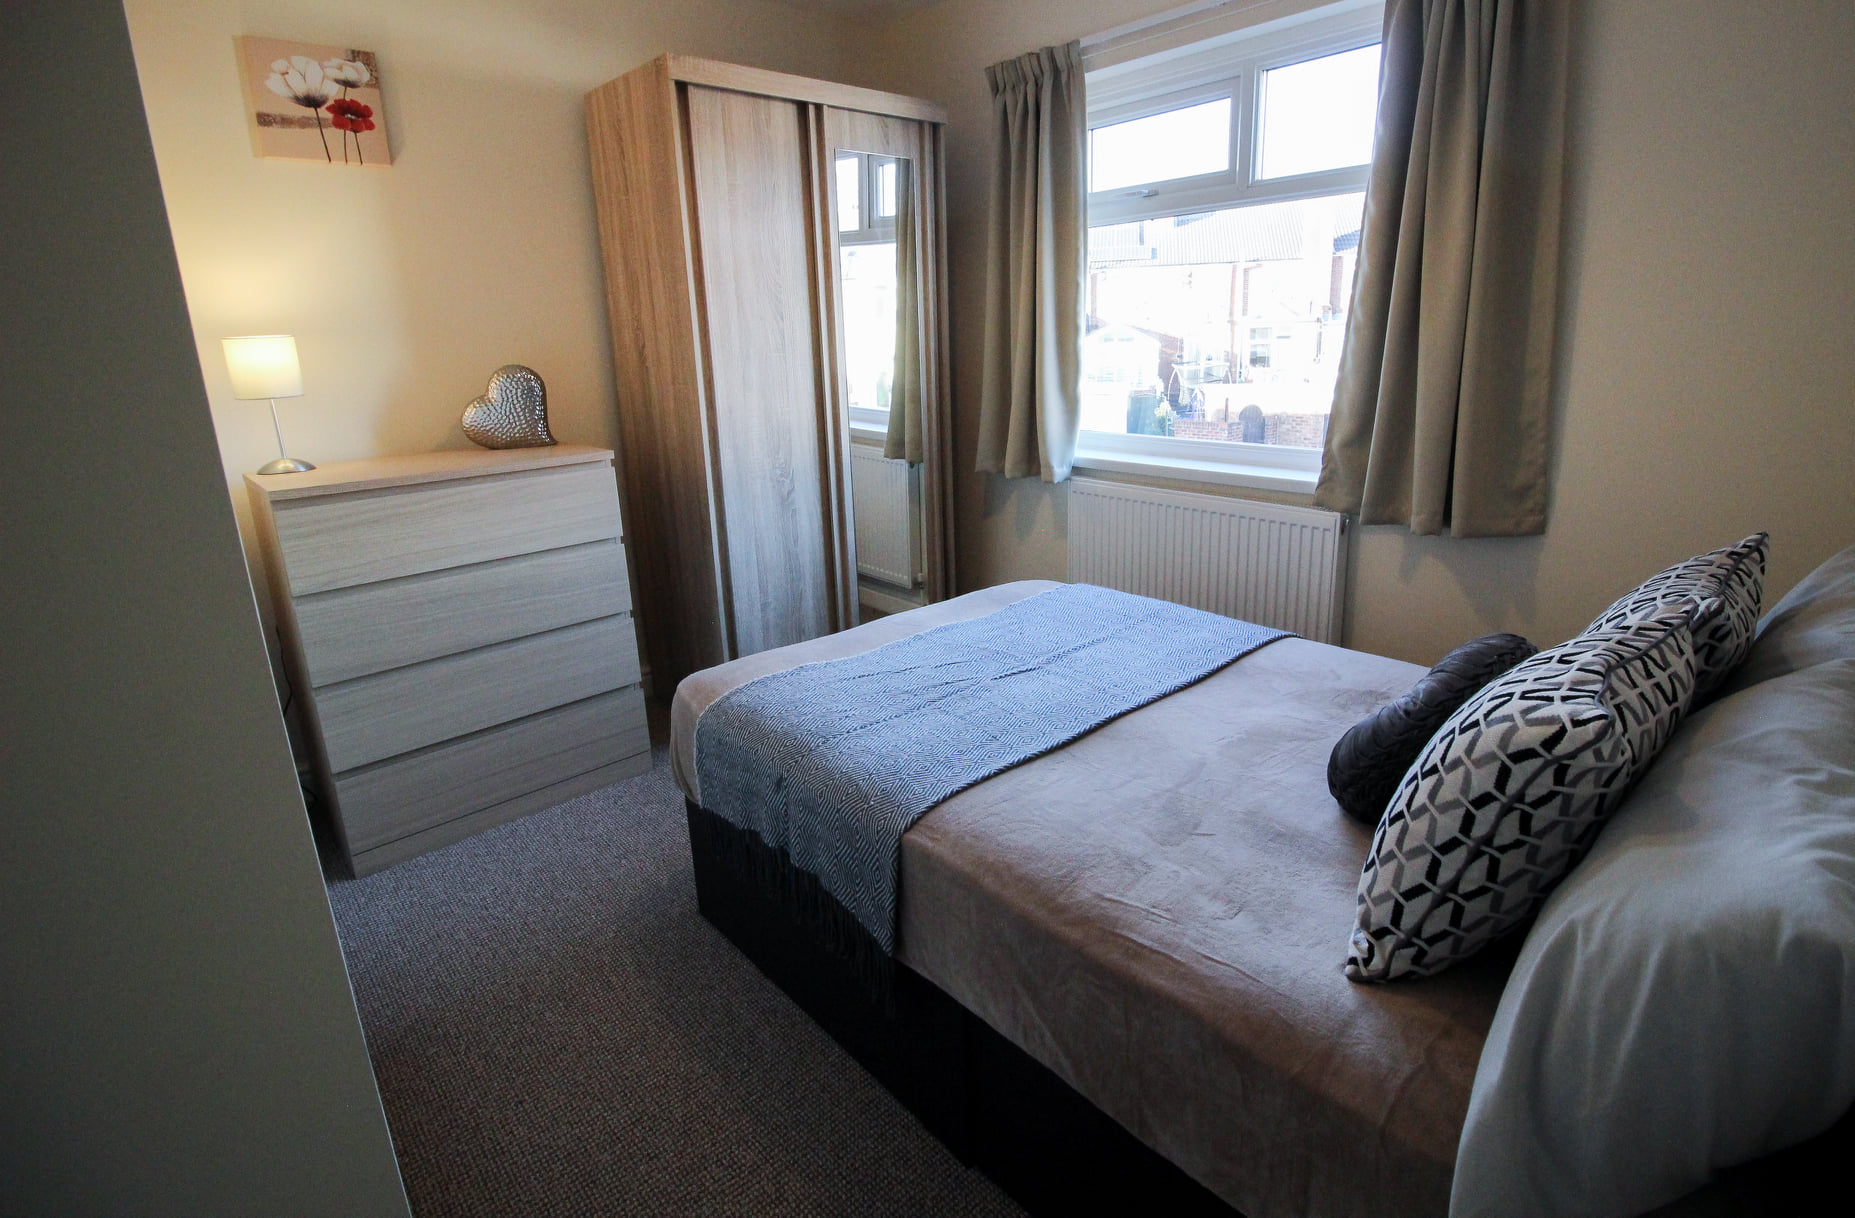 Doncaster HMO investment